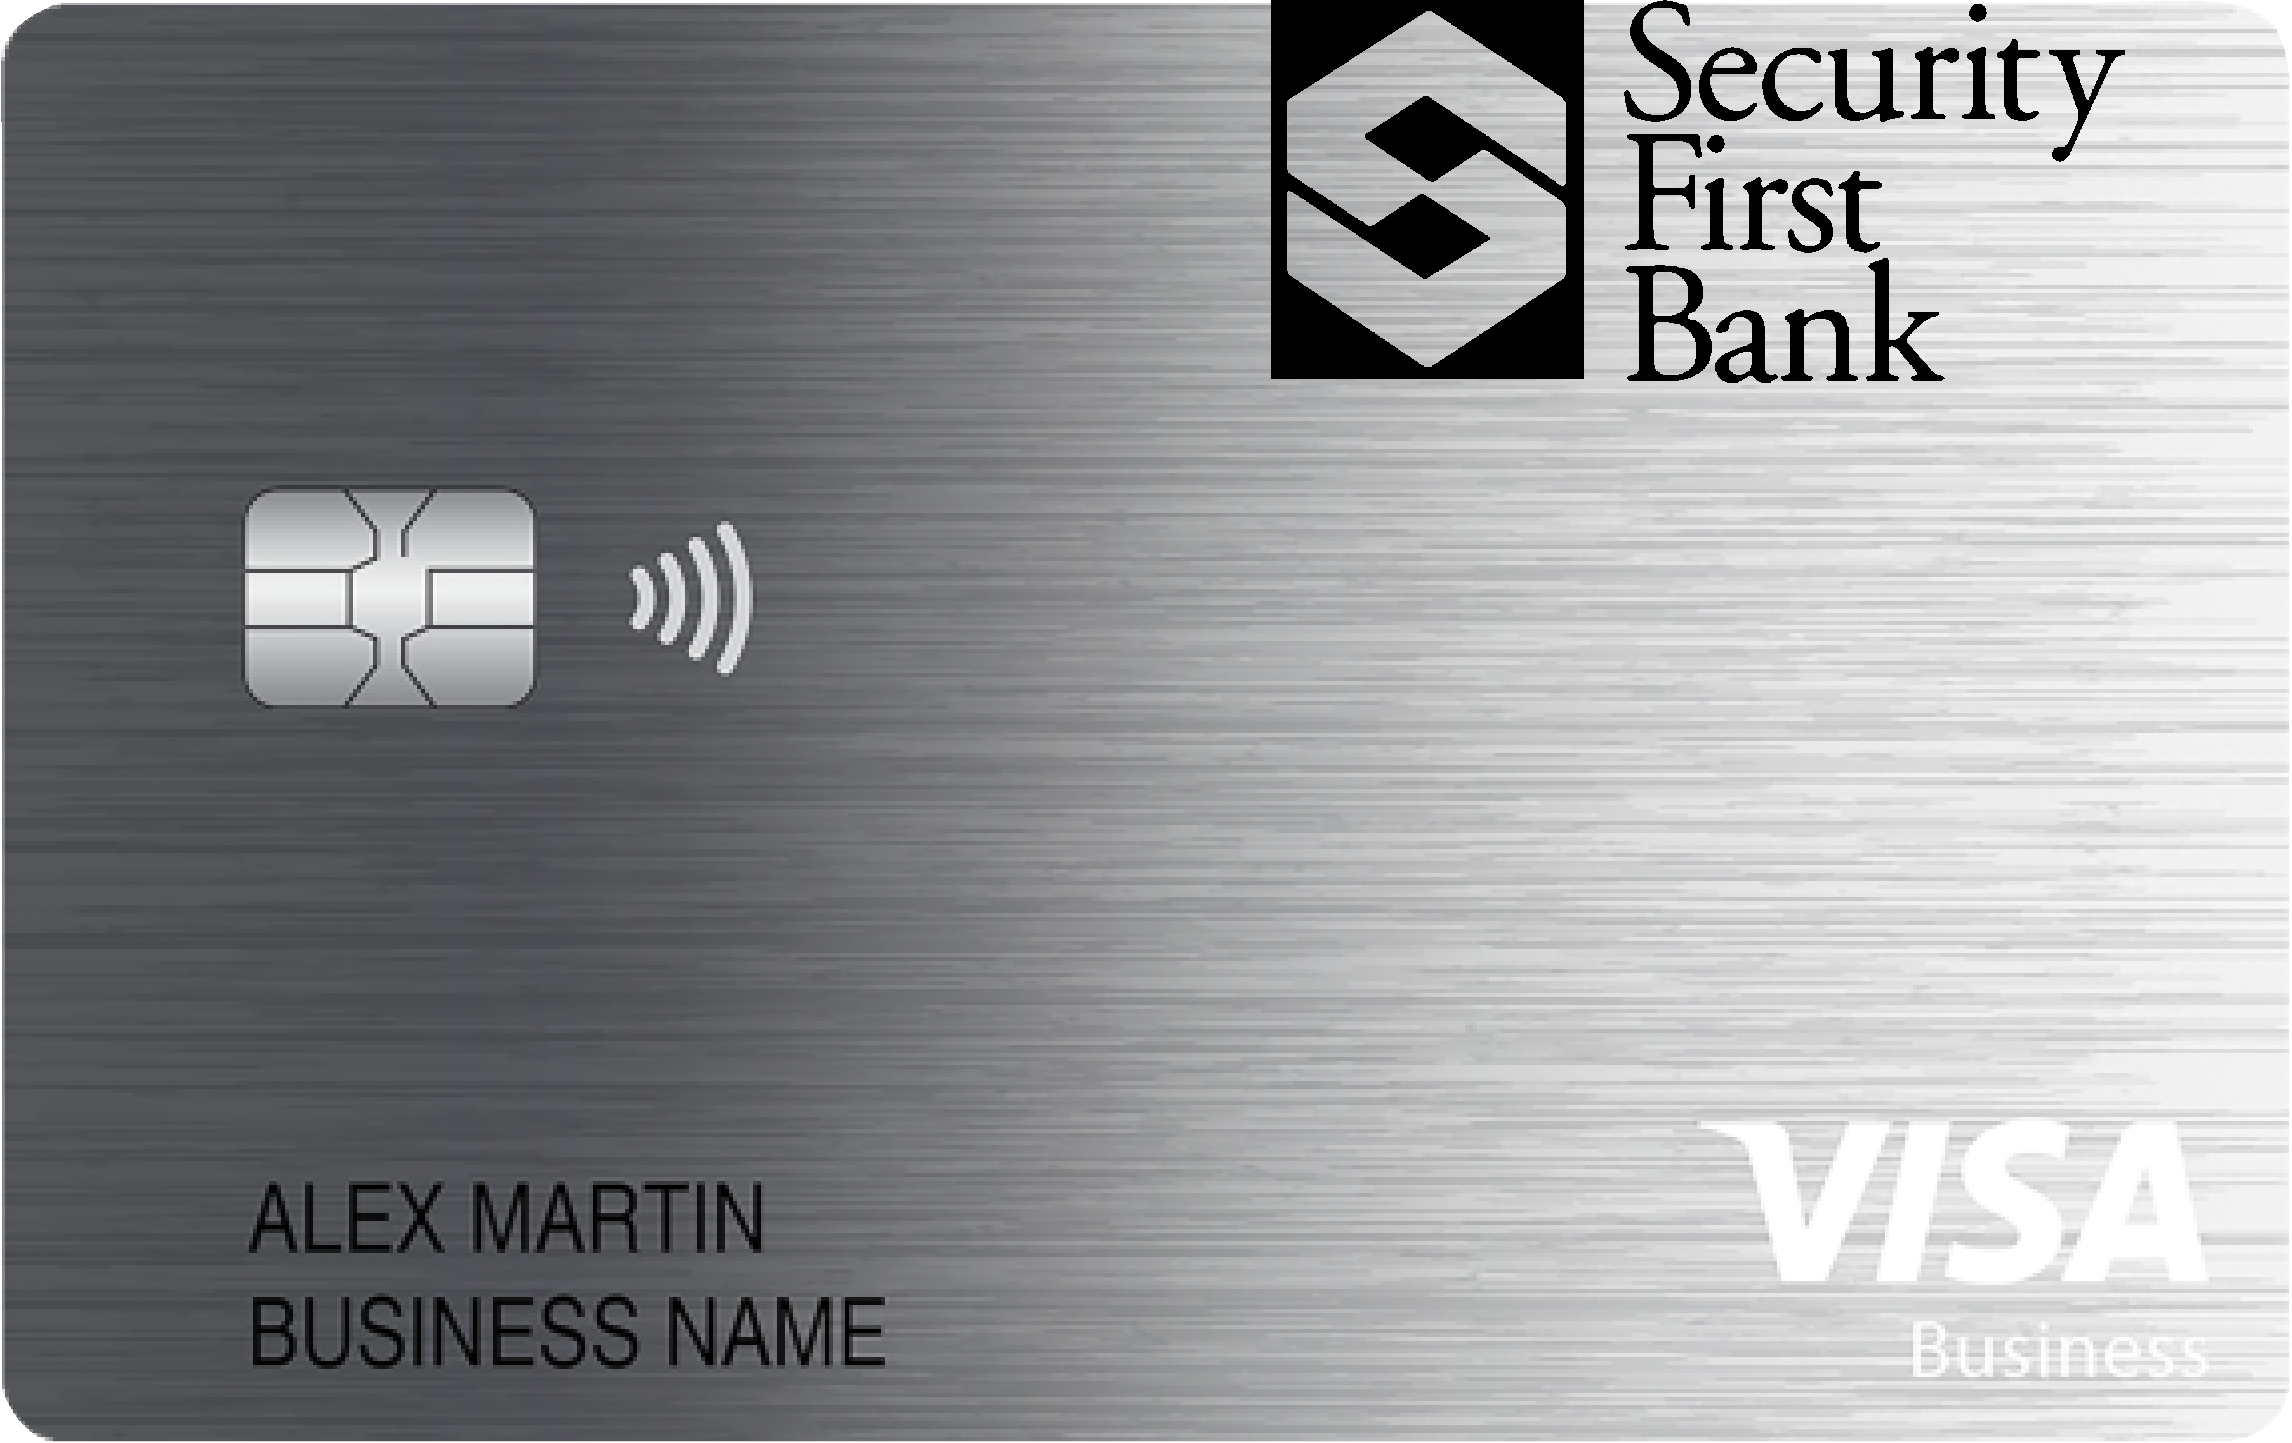 Security First Bank Business Cash Preferred Card